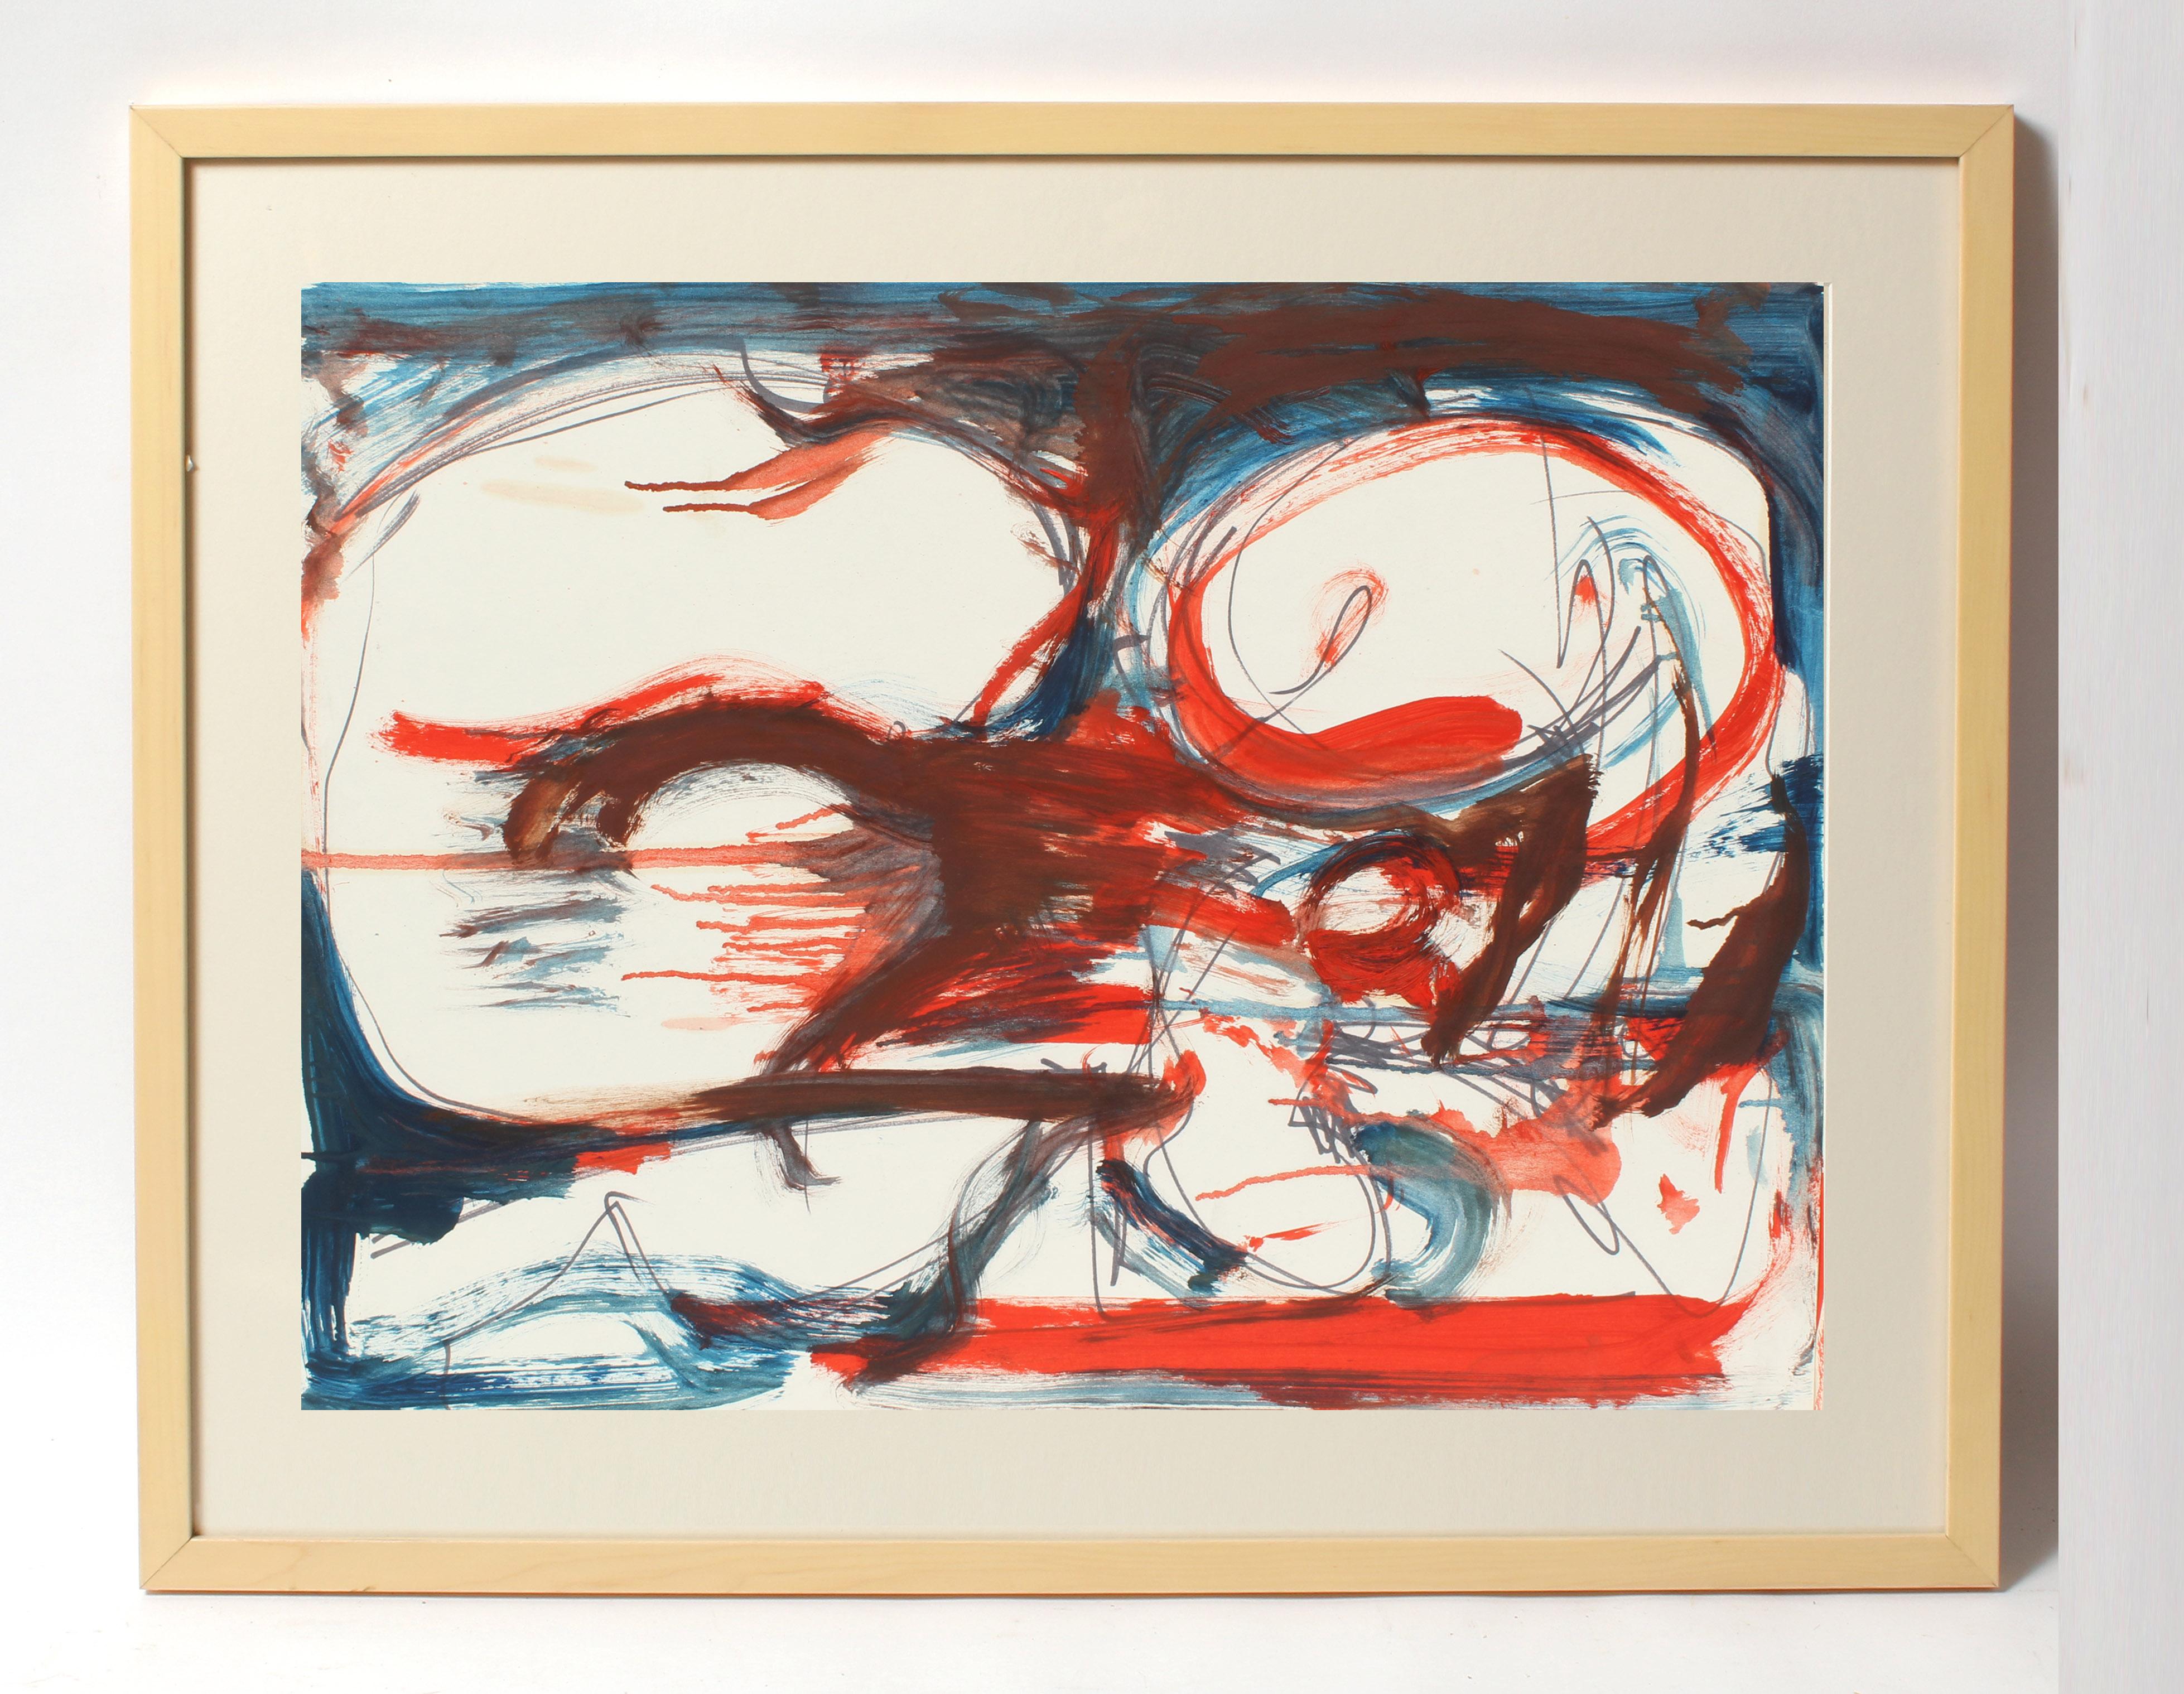 Mid-Century Modern abstract watercolor painting by American artist Toma Tovanovich (1931- 2016).   

The paper size is 17" x 22".  The framed size 22" x 27'.  The work is signed on the reverse.

Tovanovich's work is found in many public and private